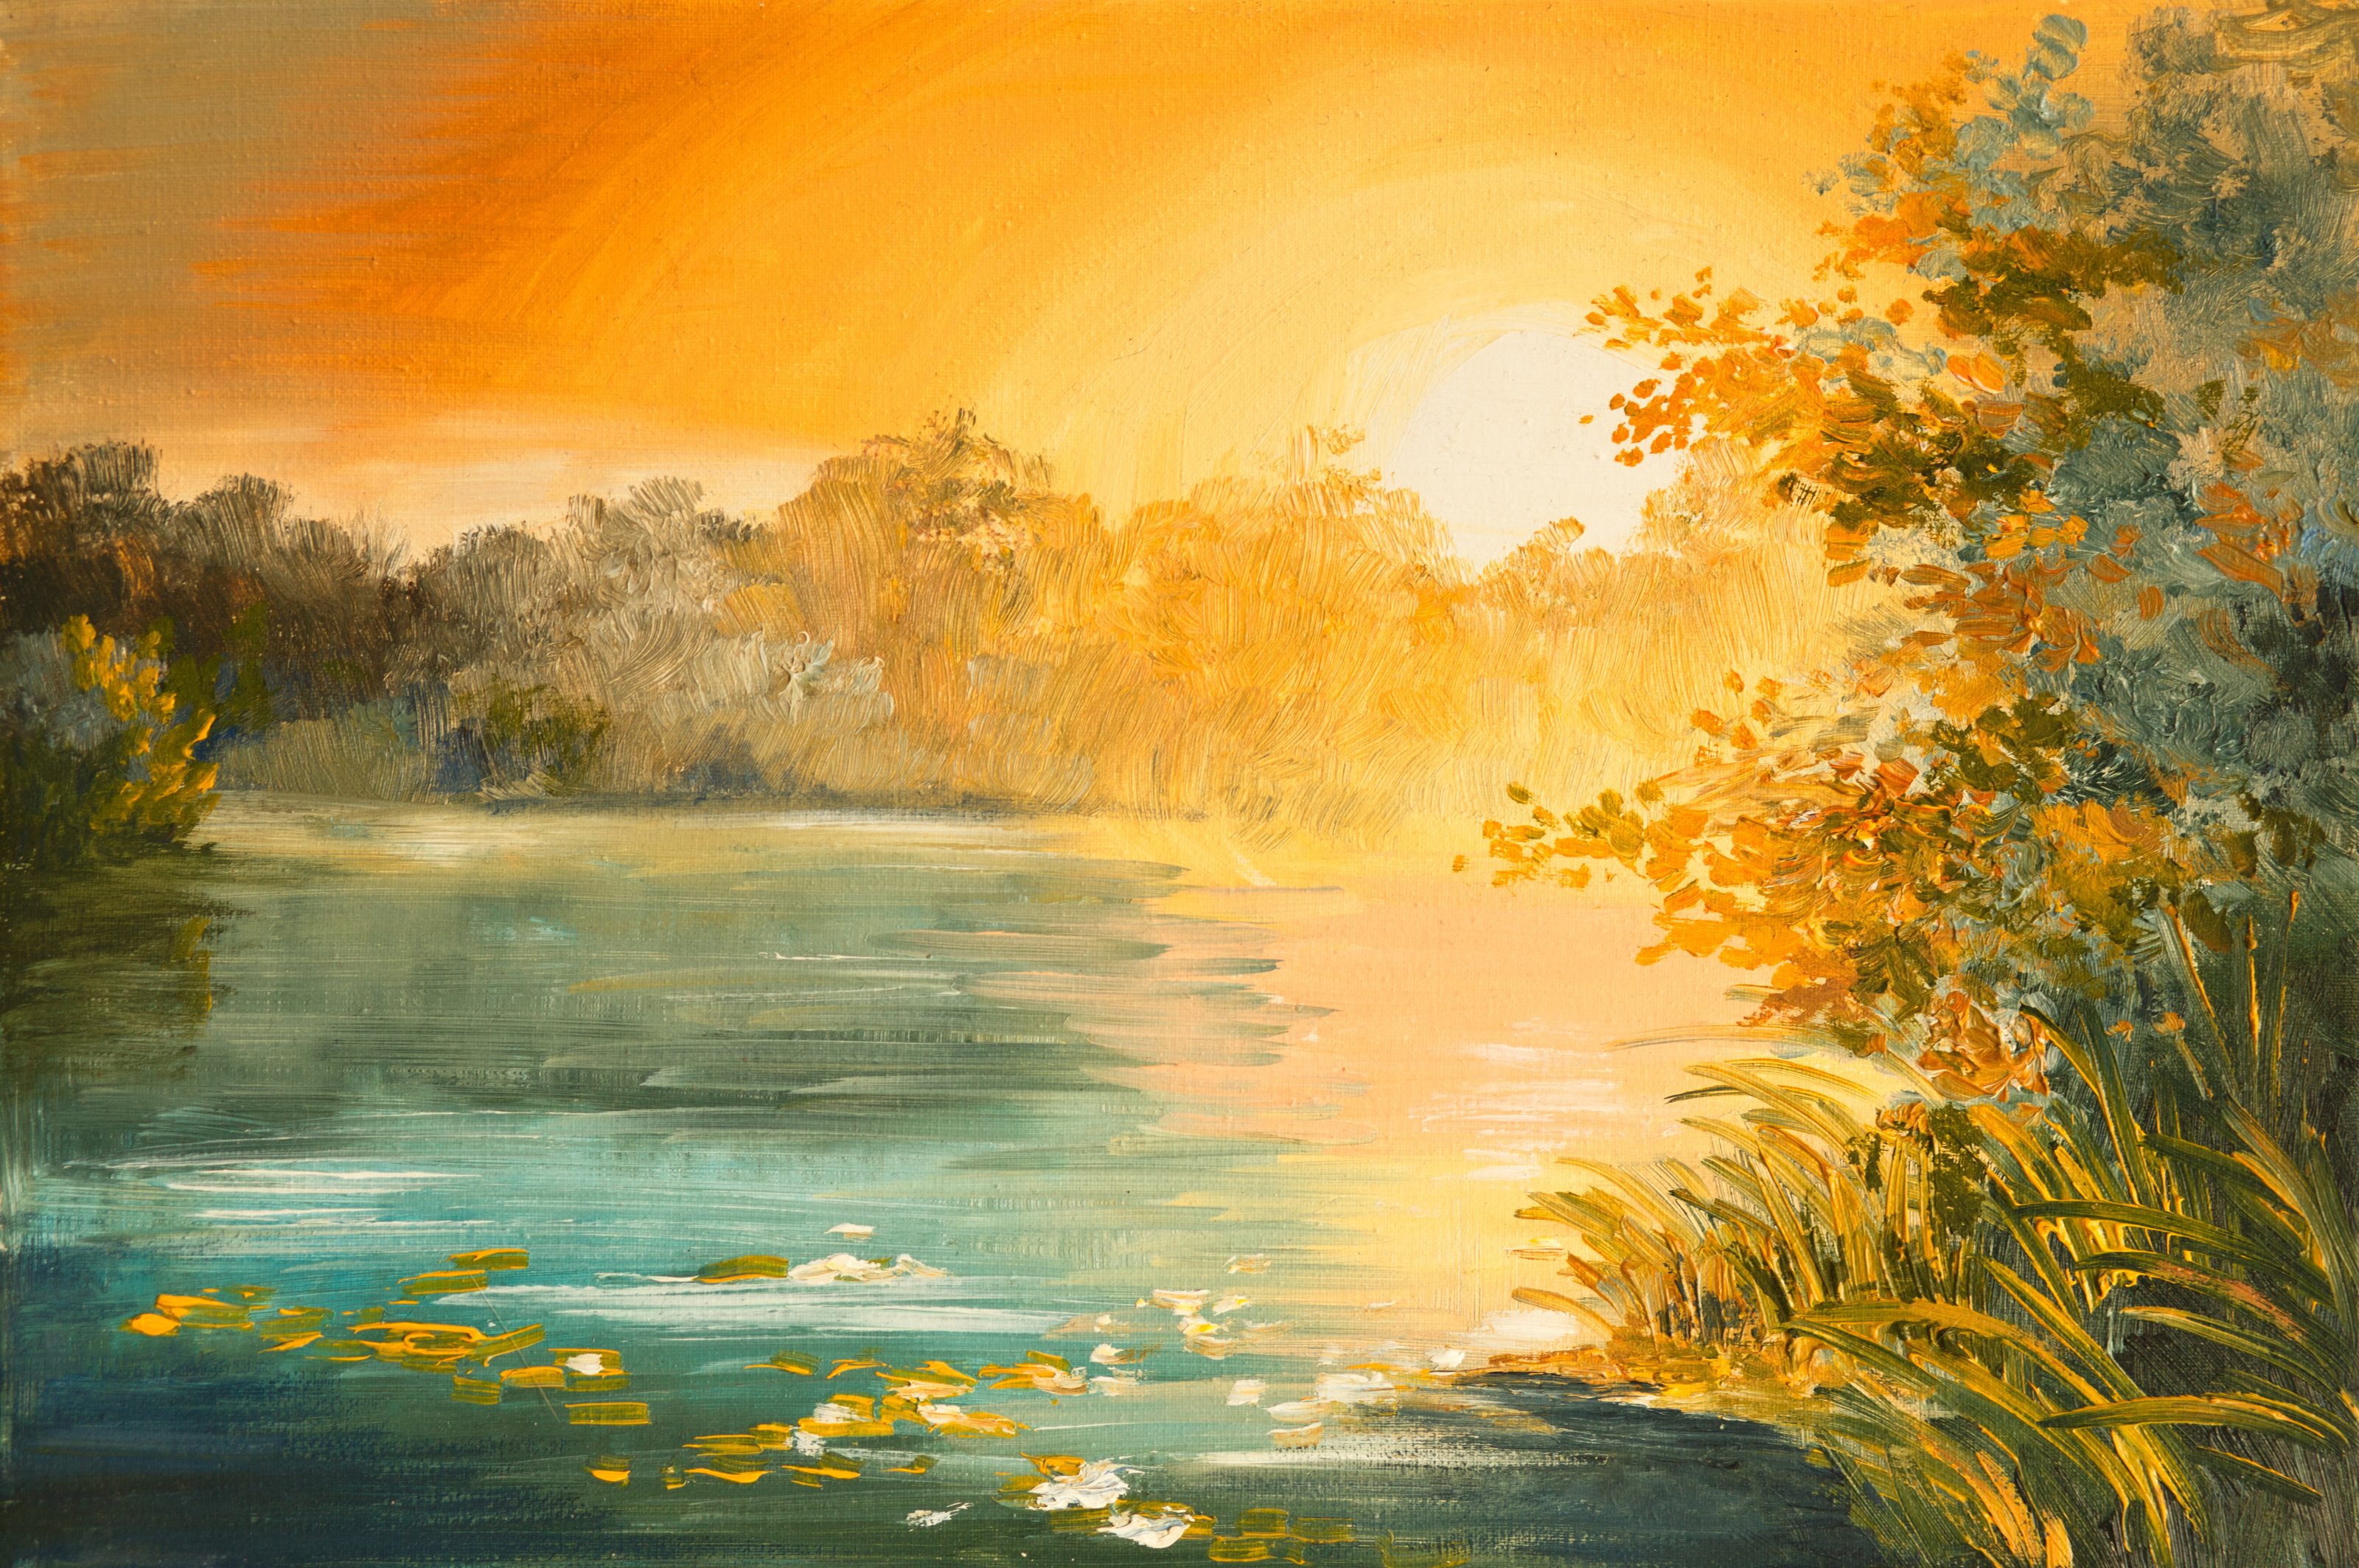 Sunset On The Lake Oil Painting Wallpaper Mural - Murals Your Way